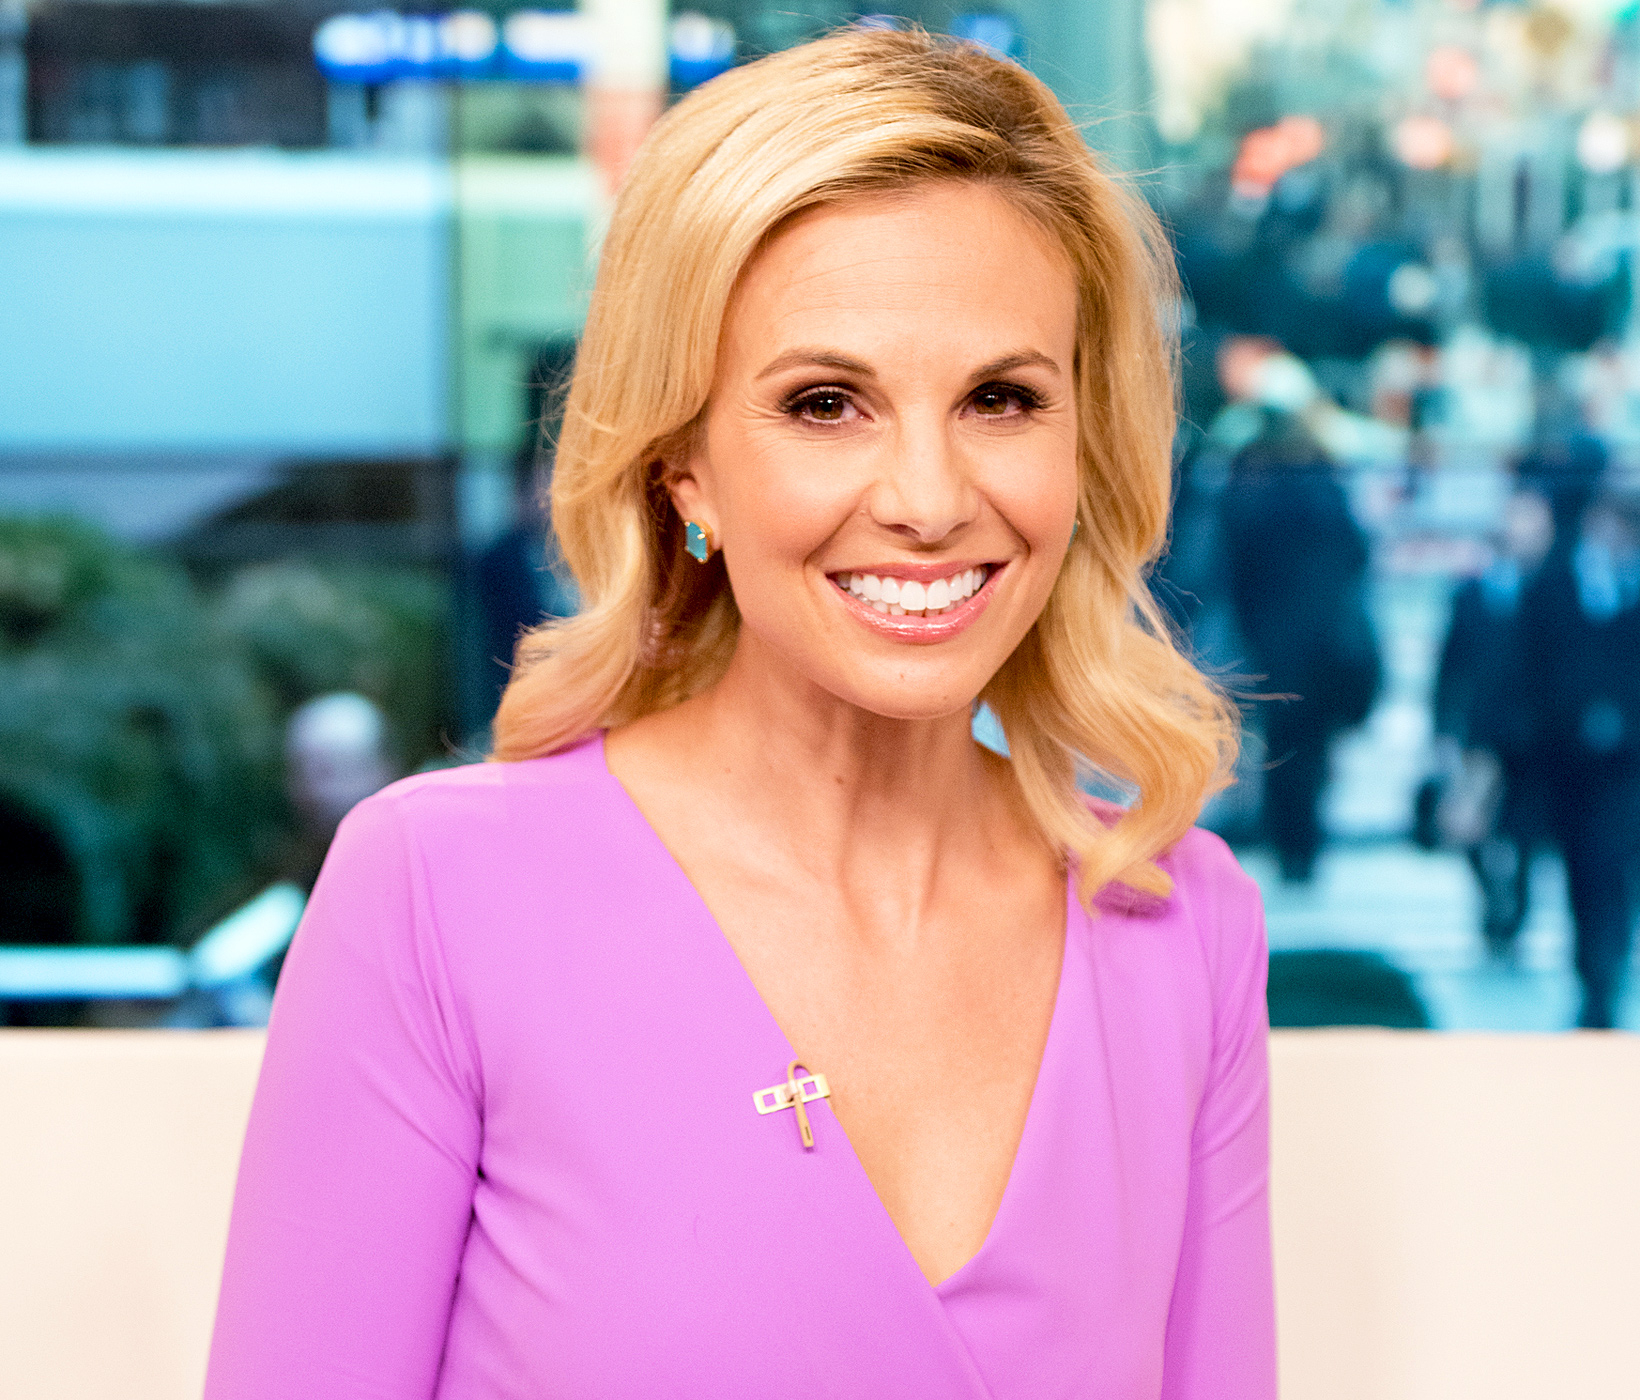 Elisabeth Hasselbeck Cries on Final Day at 'Fox & Friends'